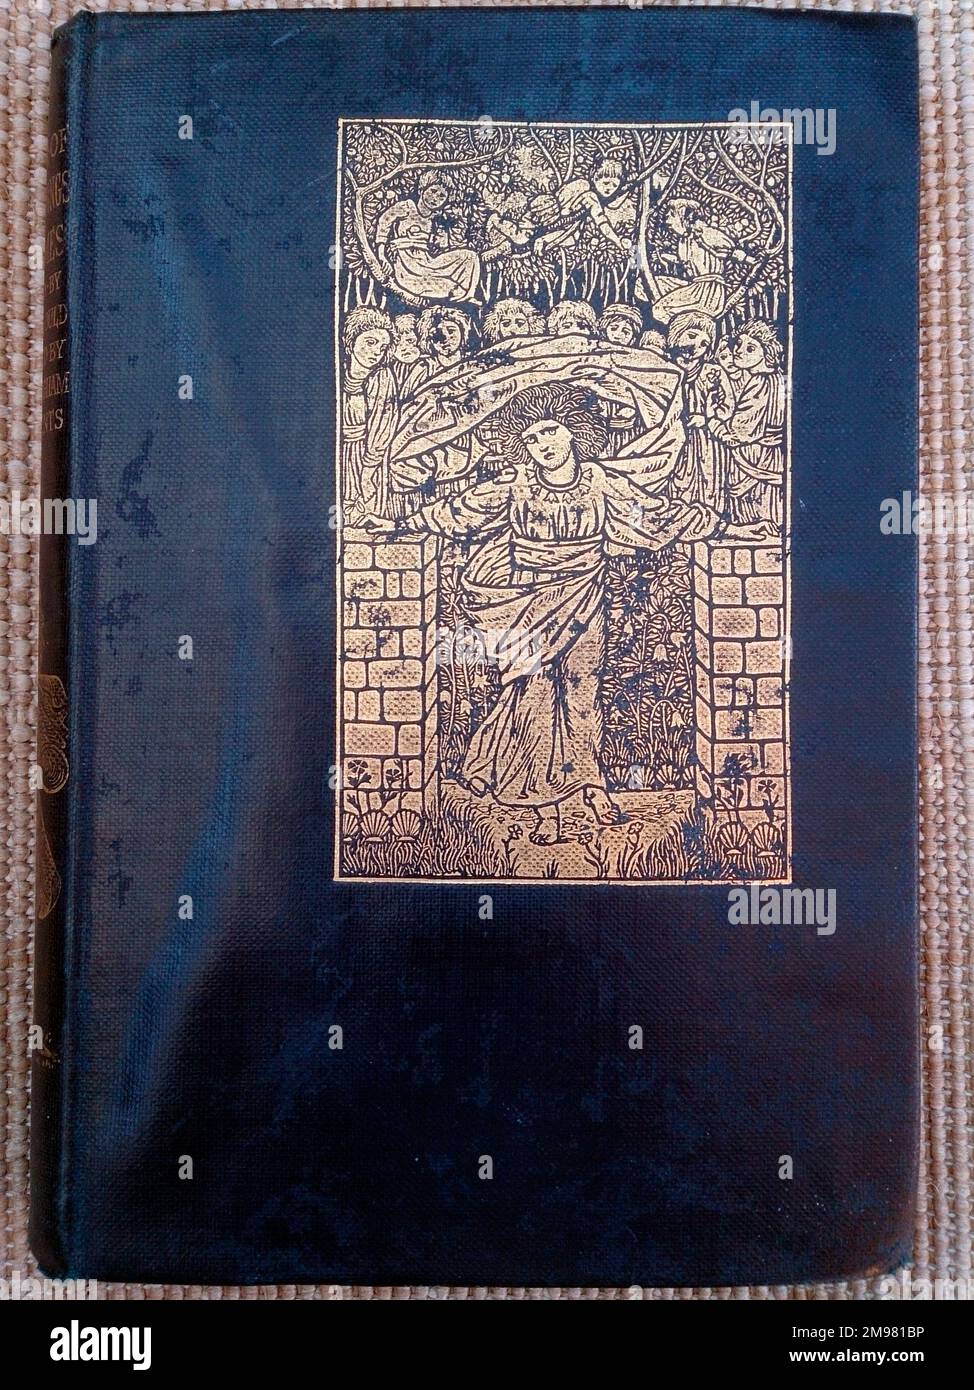 Book cover in blue and silver, A Book of Nursery Songs and Rhymes, edited by S Baring-Gould, with illustrations by members of the Birmingham Art School under the direction of A J Gaskin. The scene probably refers to the rhyme, Mary Mary Quite Contrary. Stock Photo